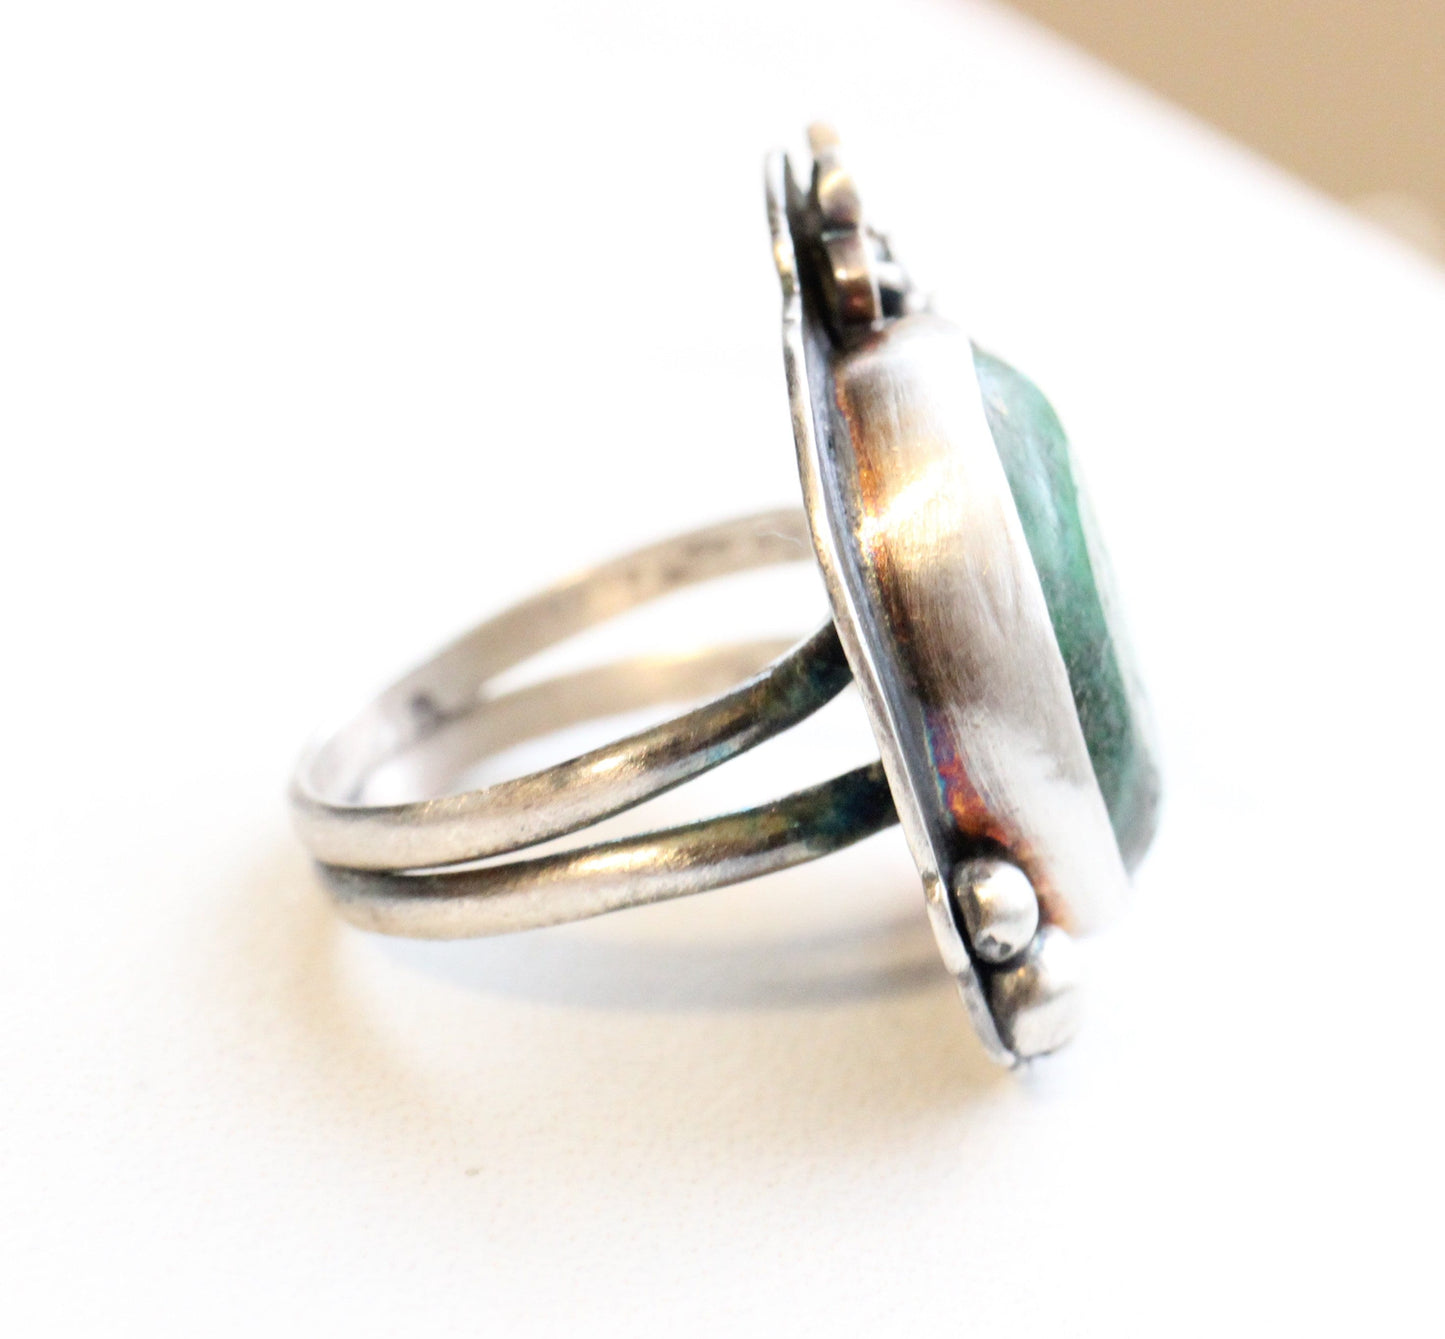 Jade Ring // Sterling Silver Green Jade Ring with Bumble Bee and Flower // Large Gemstone Ring